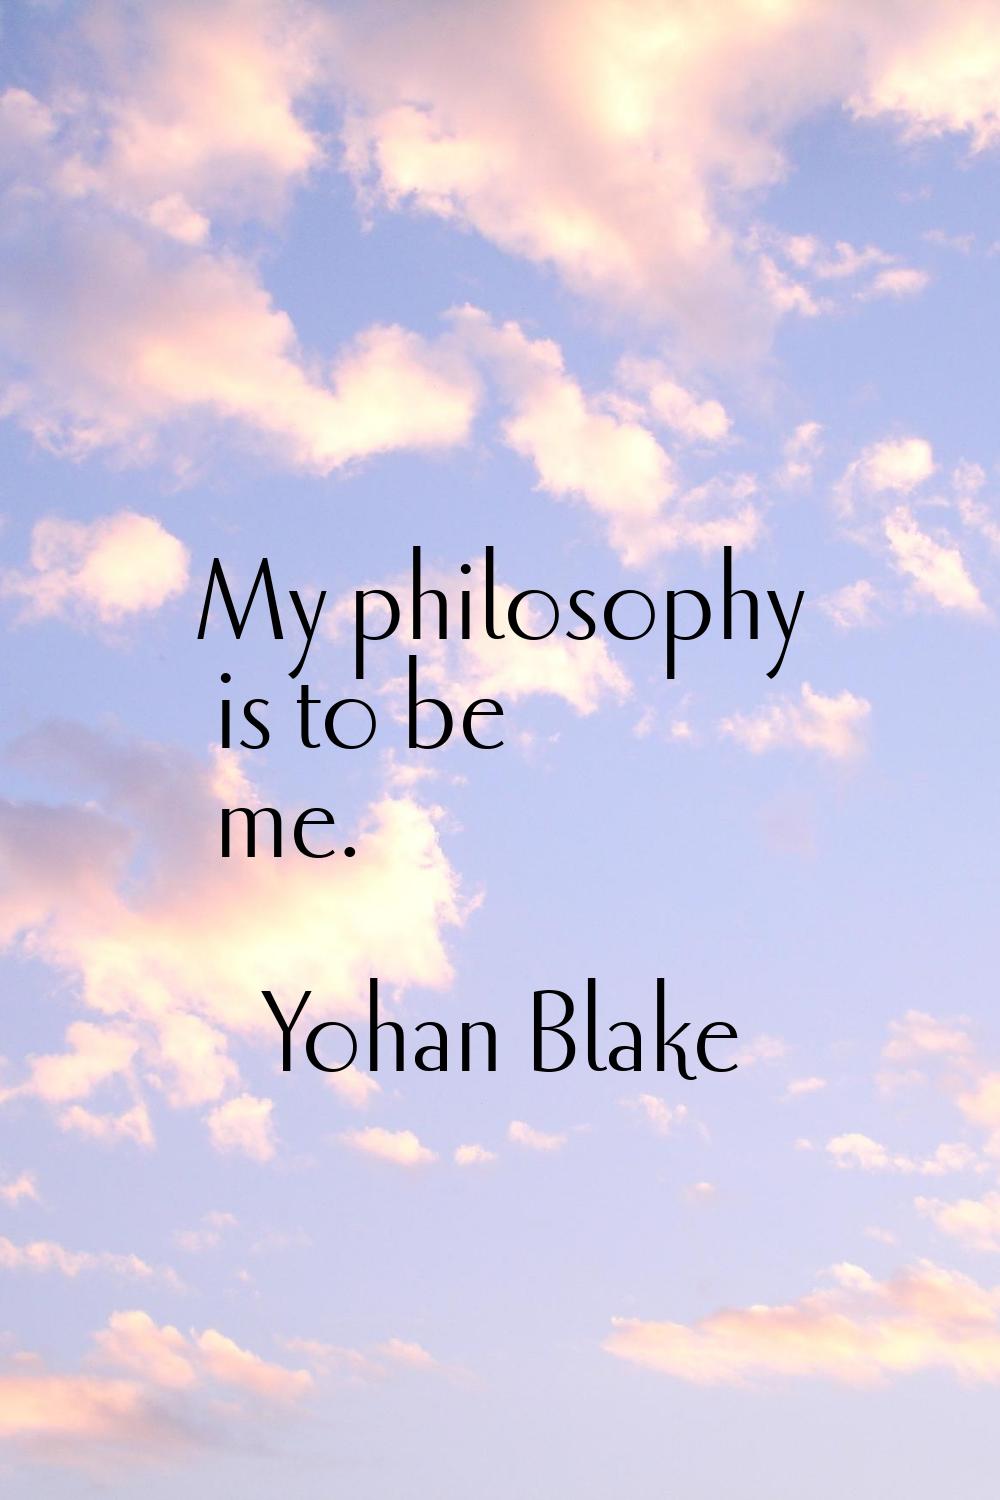 My philosophy is to be me.